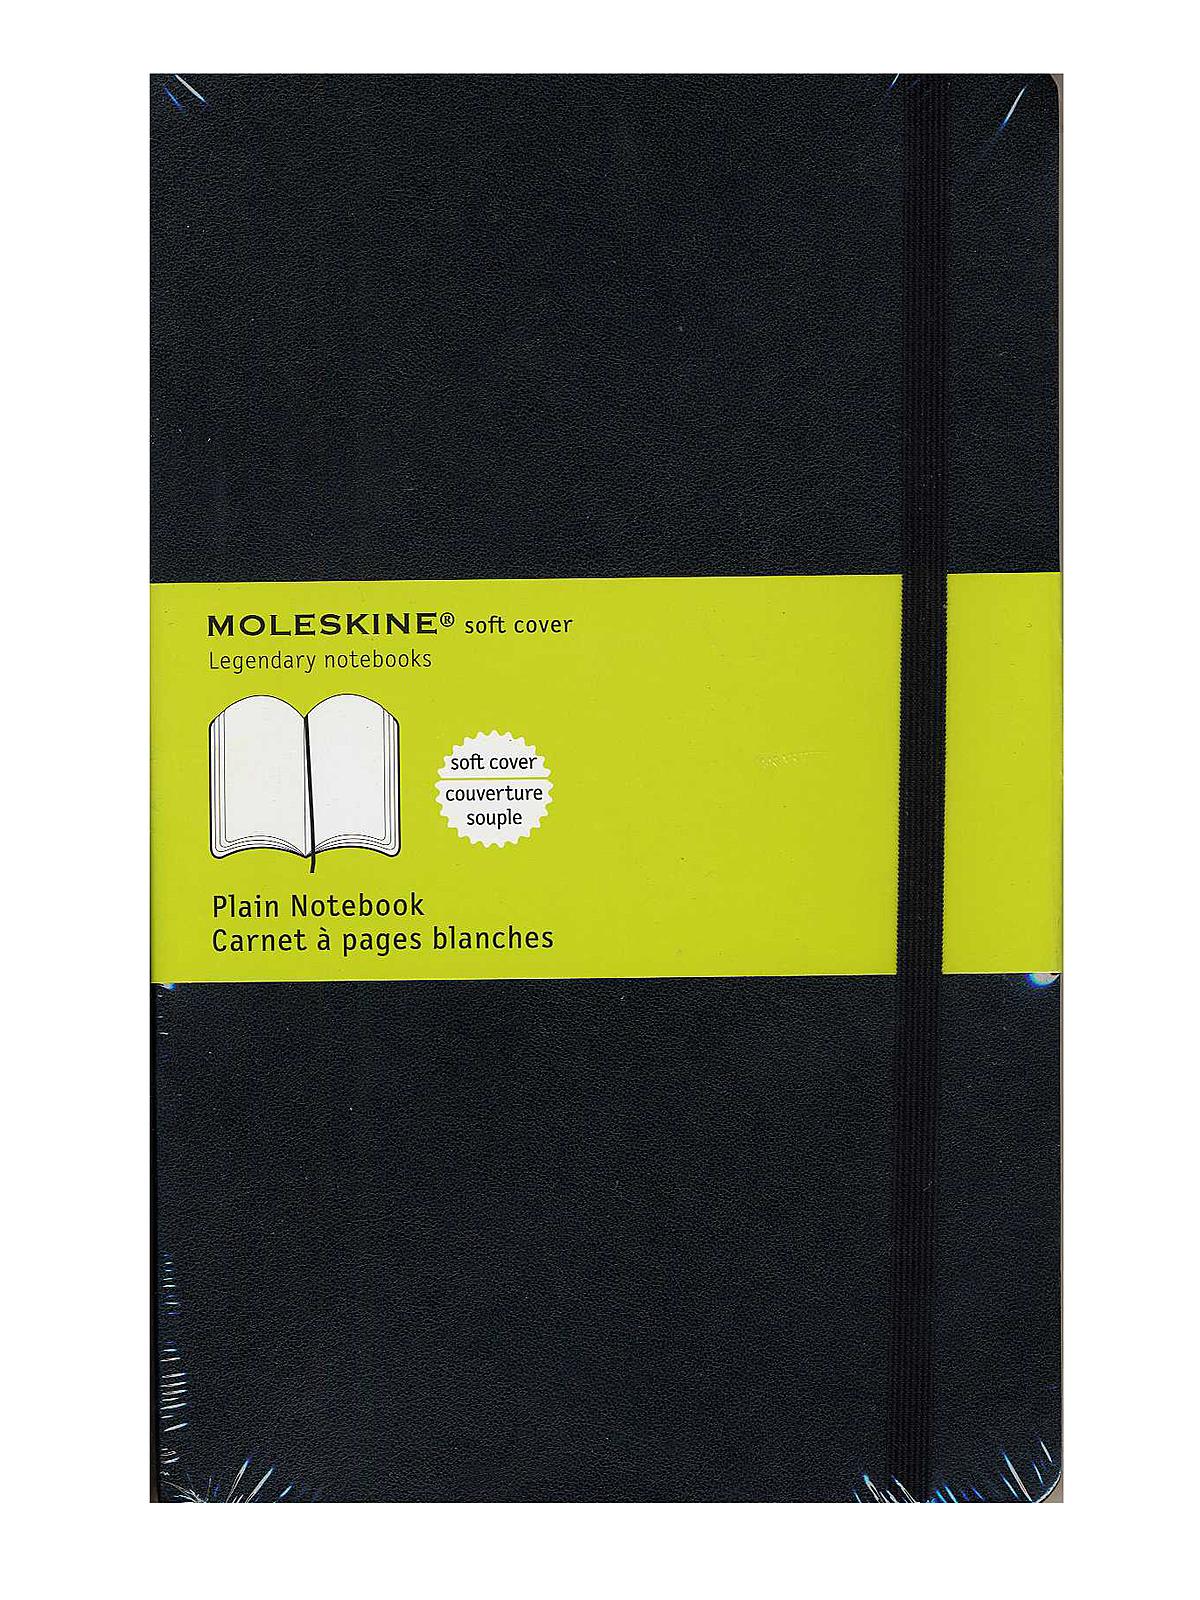 Classic Soft Cover Notebooks Black 5 In. X 8 1 4 In. 192 Pages, Unlined